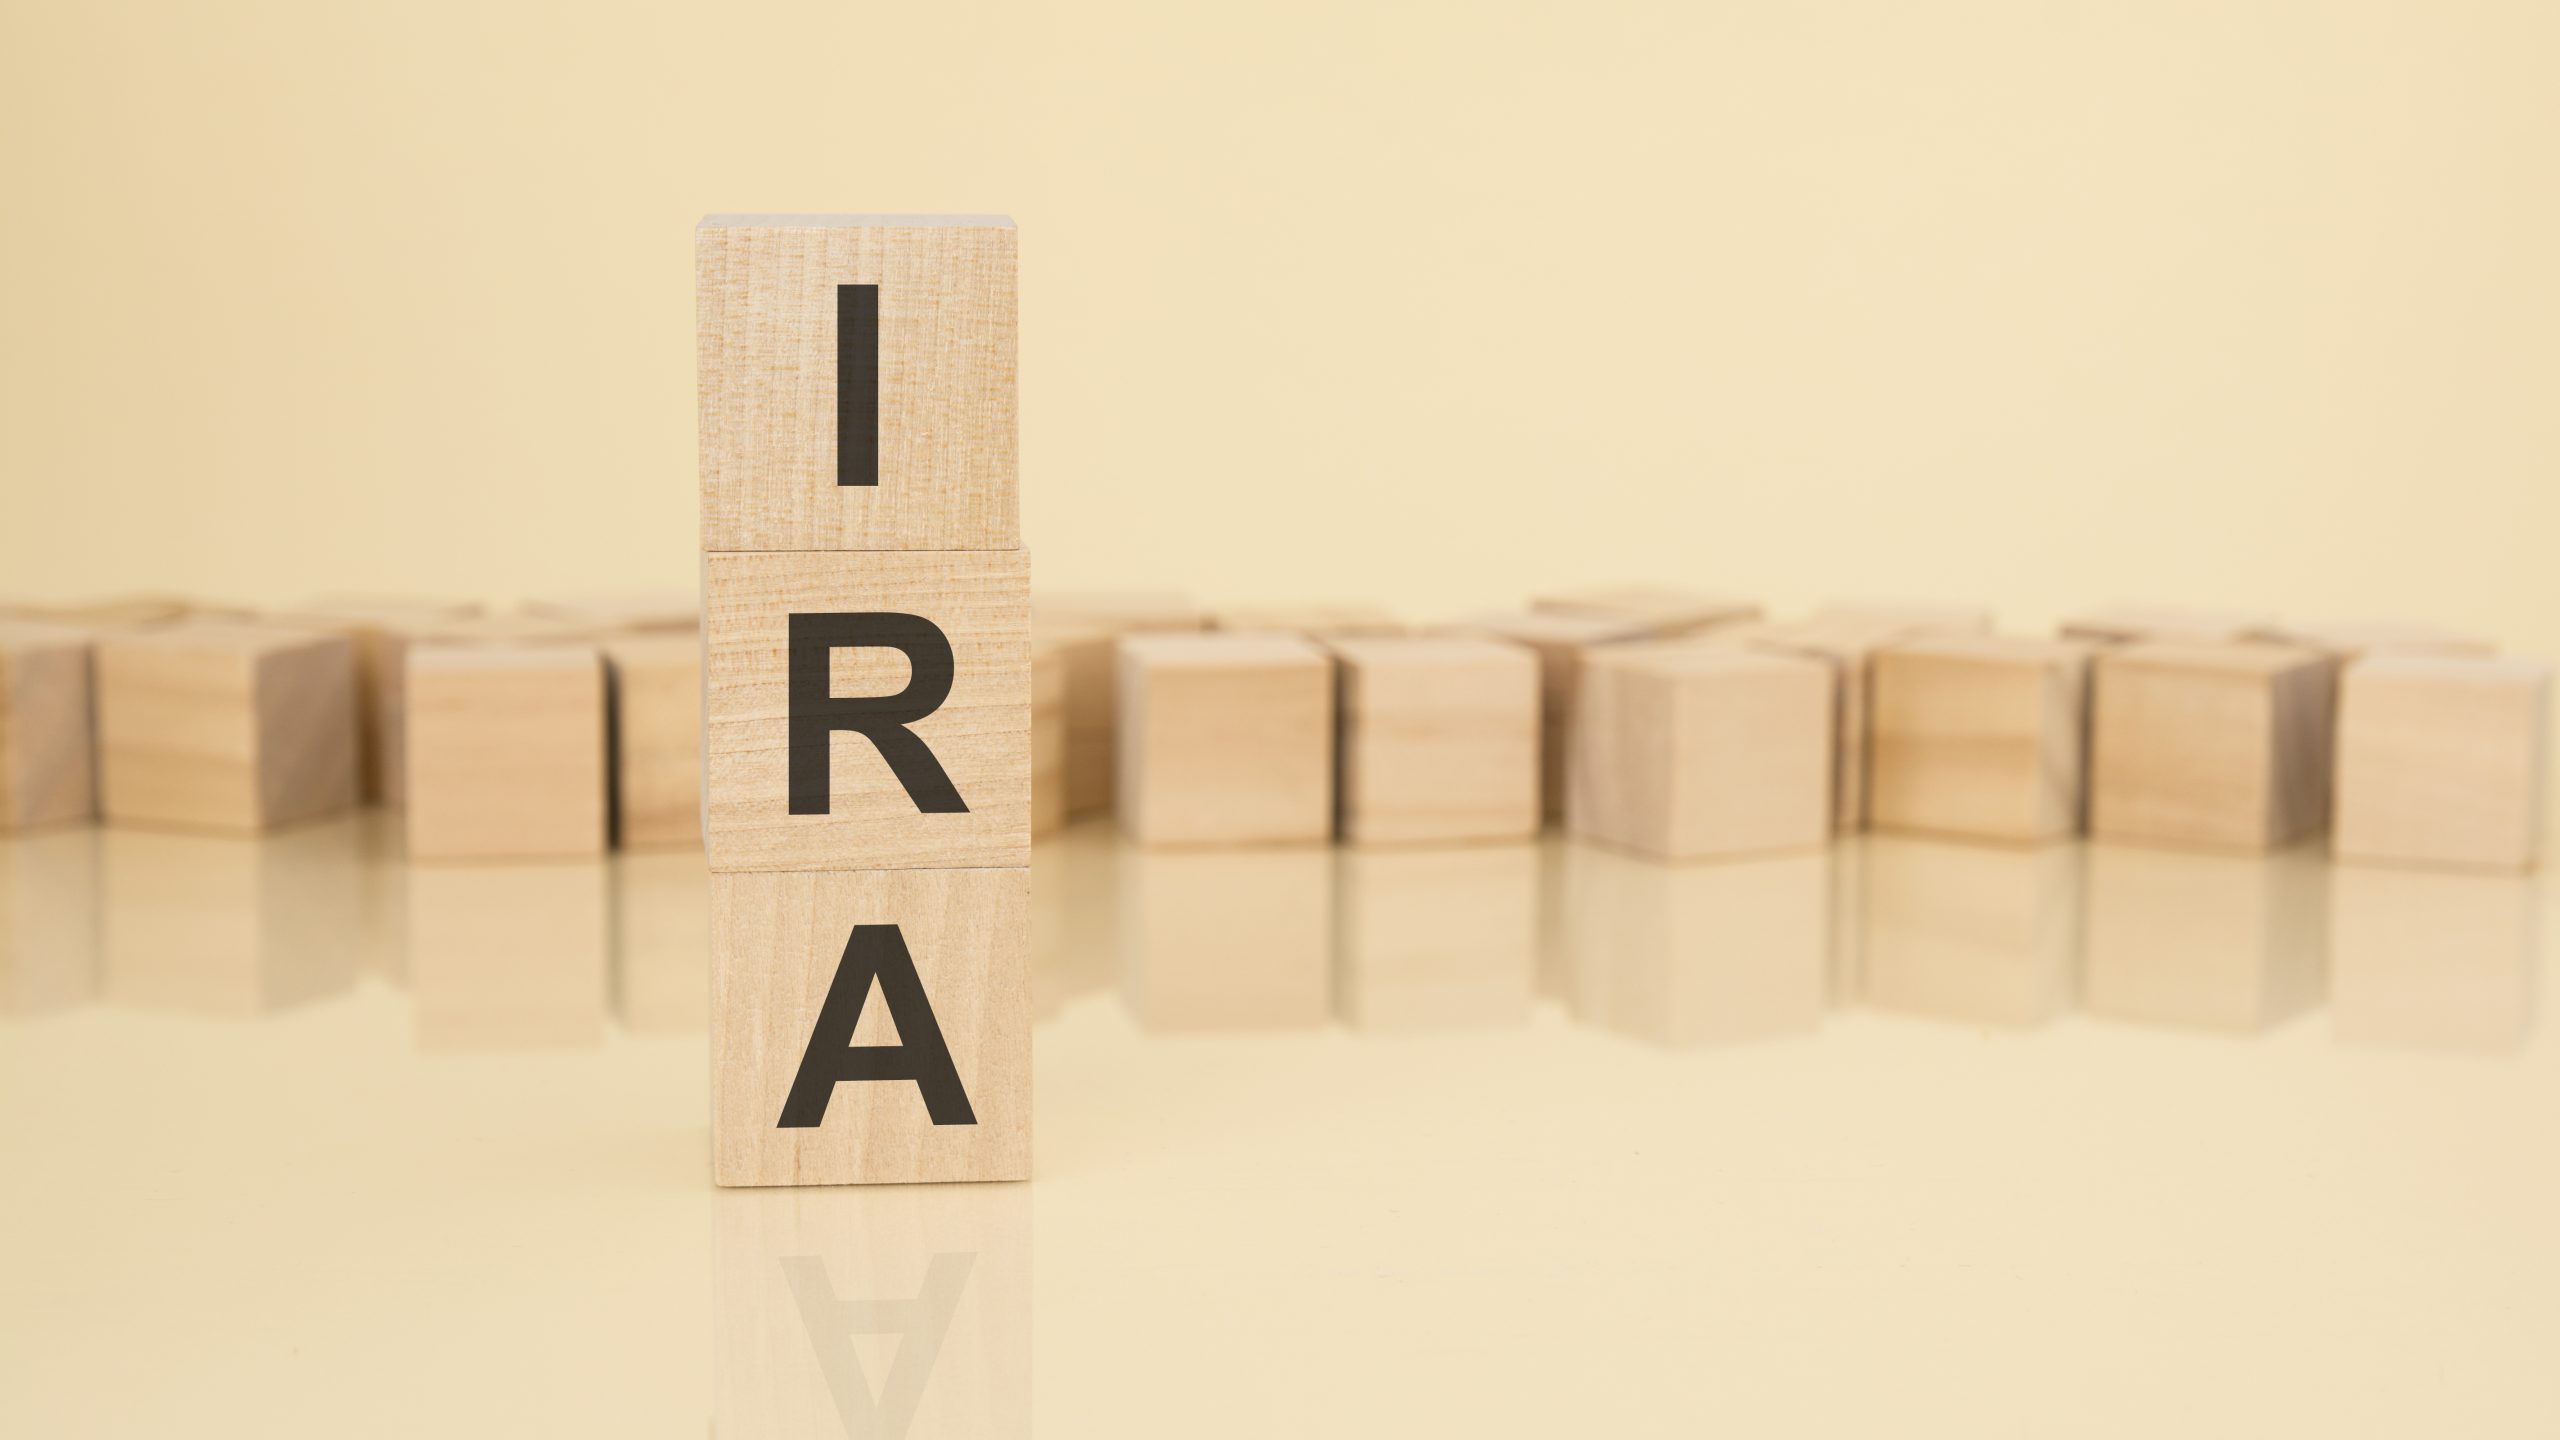 IRA - acronym from wooden blocks with letters, Individual Retirement Account concept on yellow background. copy space available.